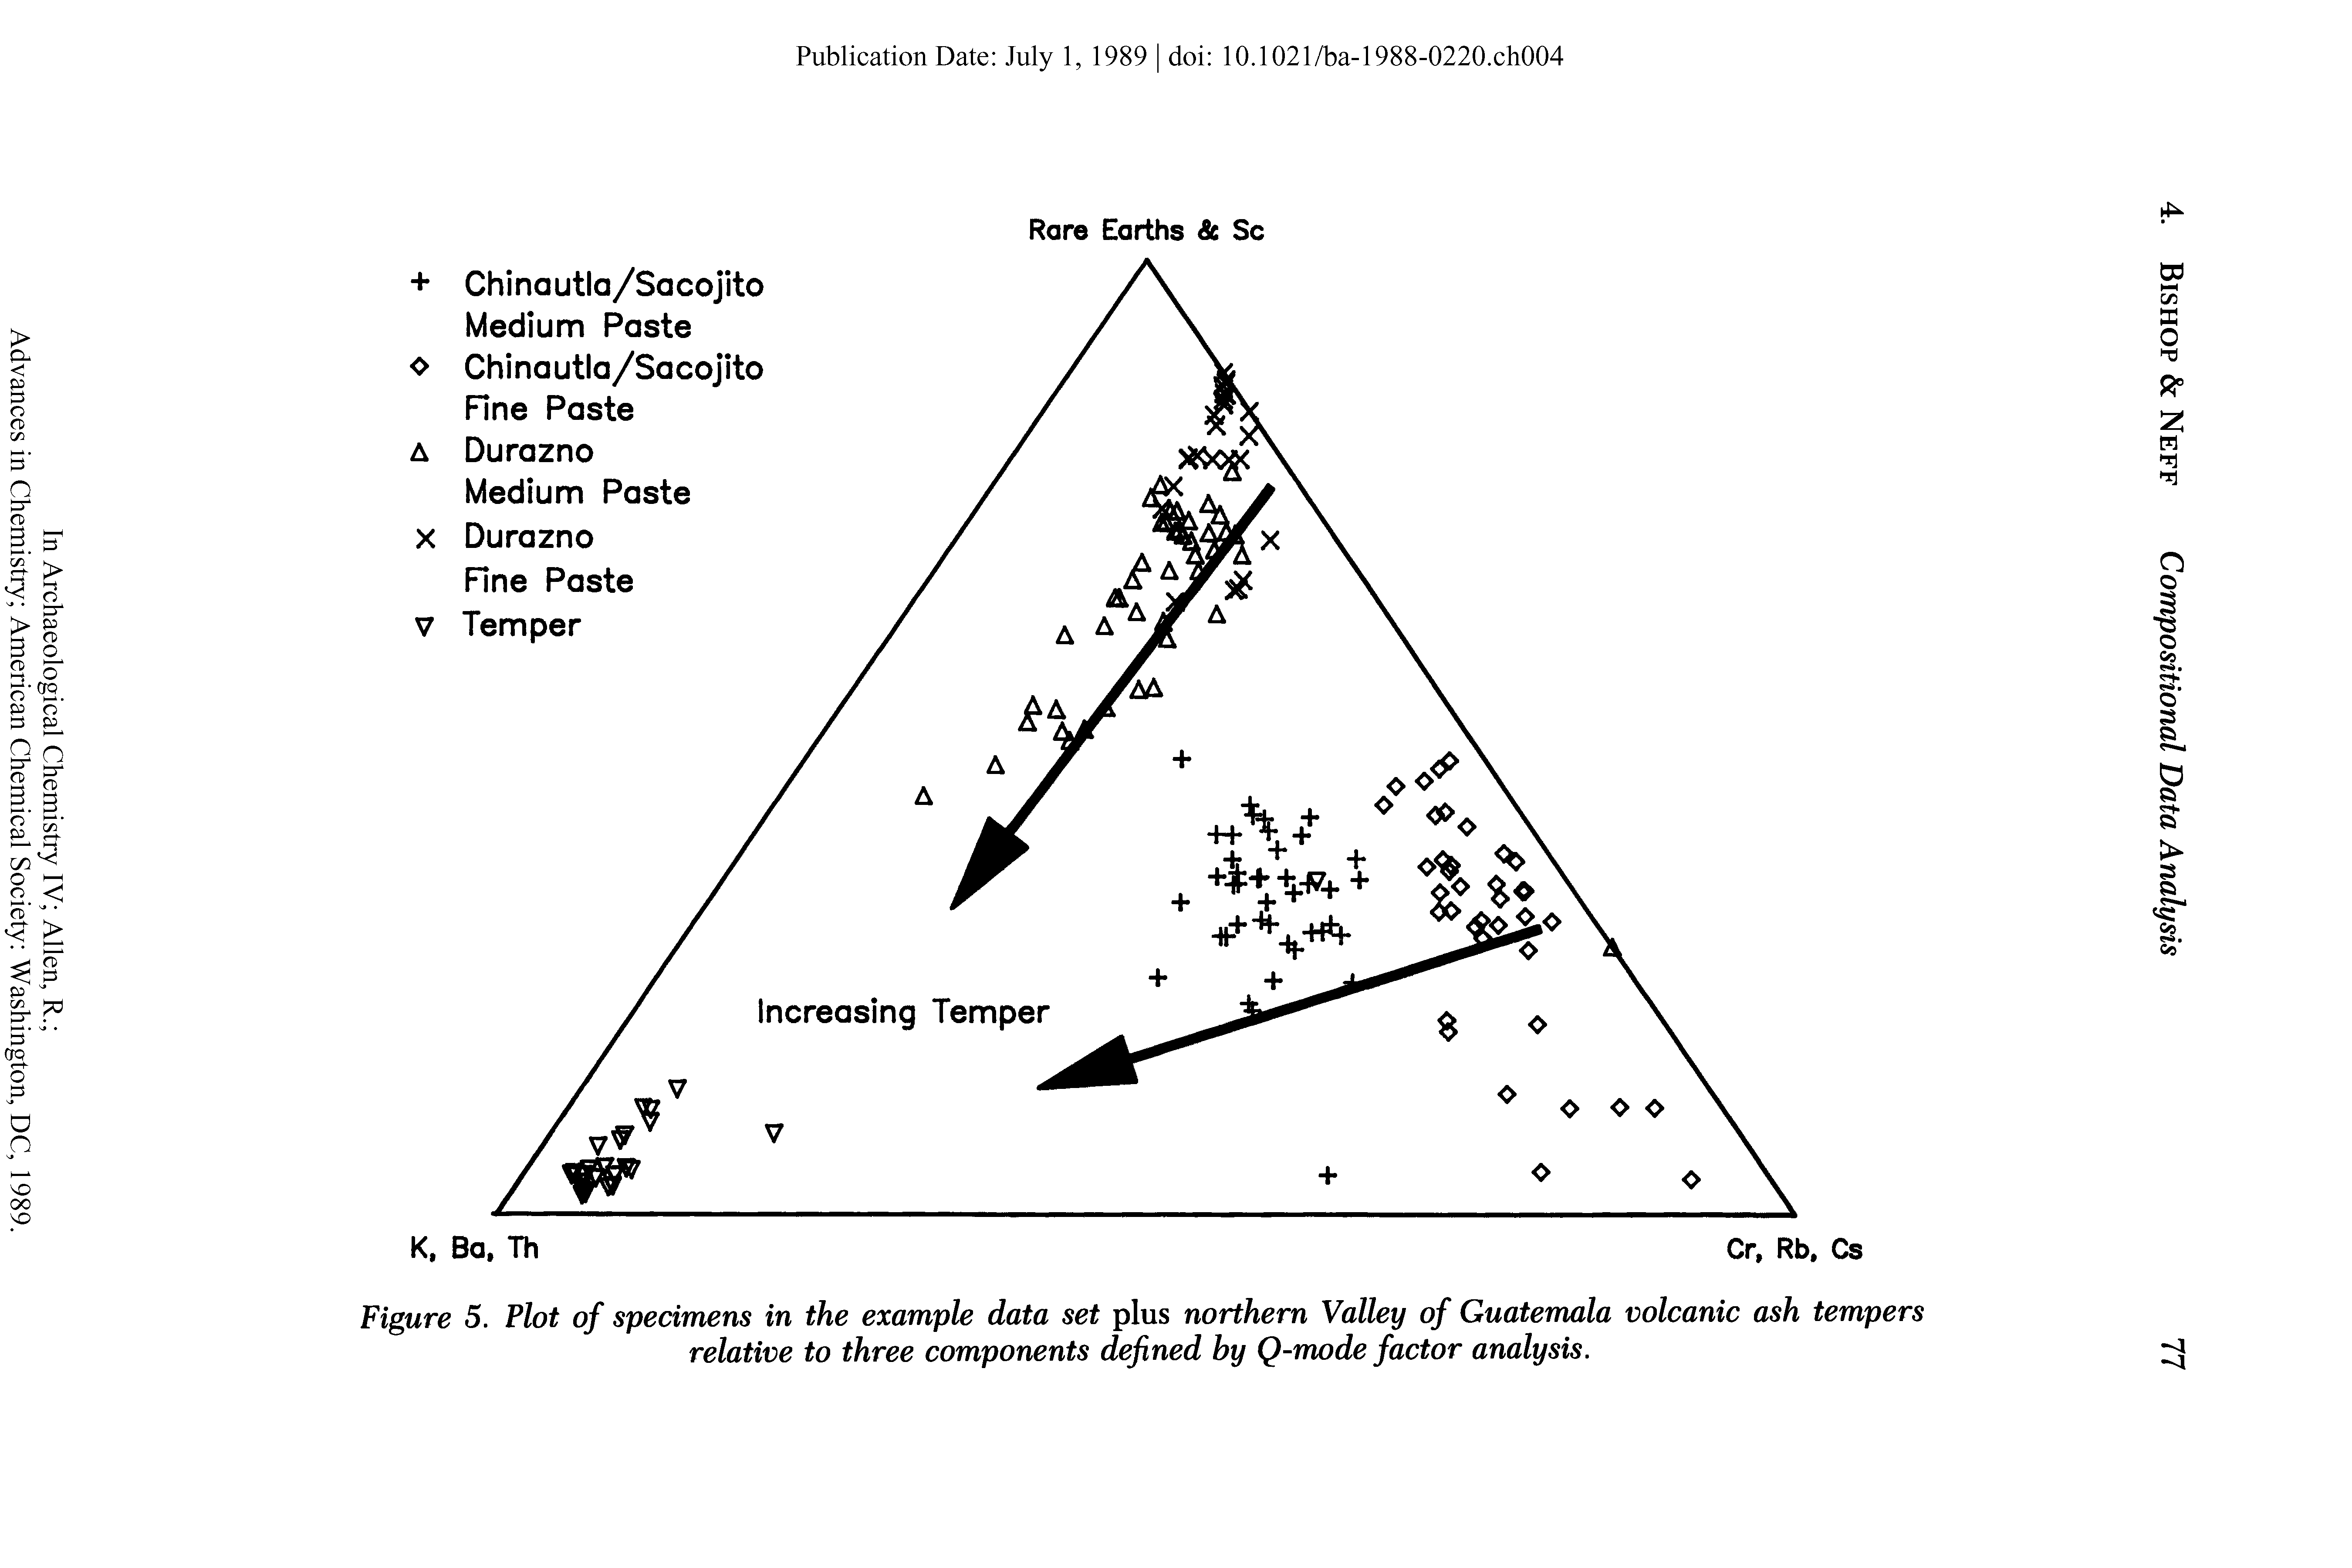 Figure 5. Plot of specimens in the example data set plus northern Valley of Guatemala volcanic ash tempers relative to three components defined by Q-mode factor analysis.